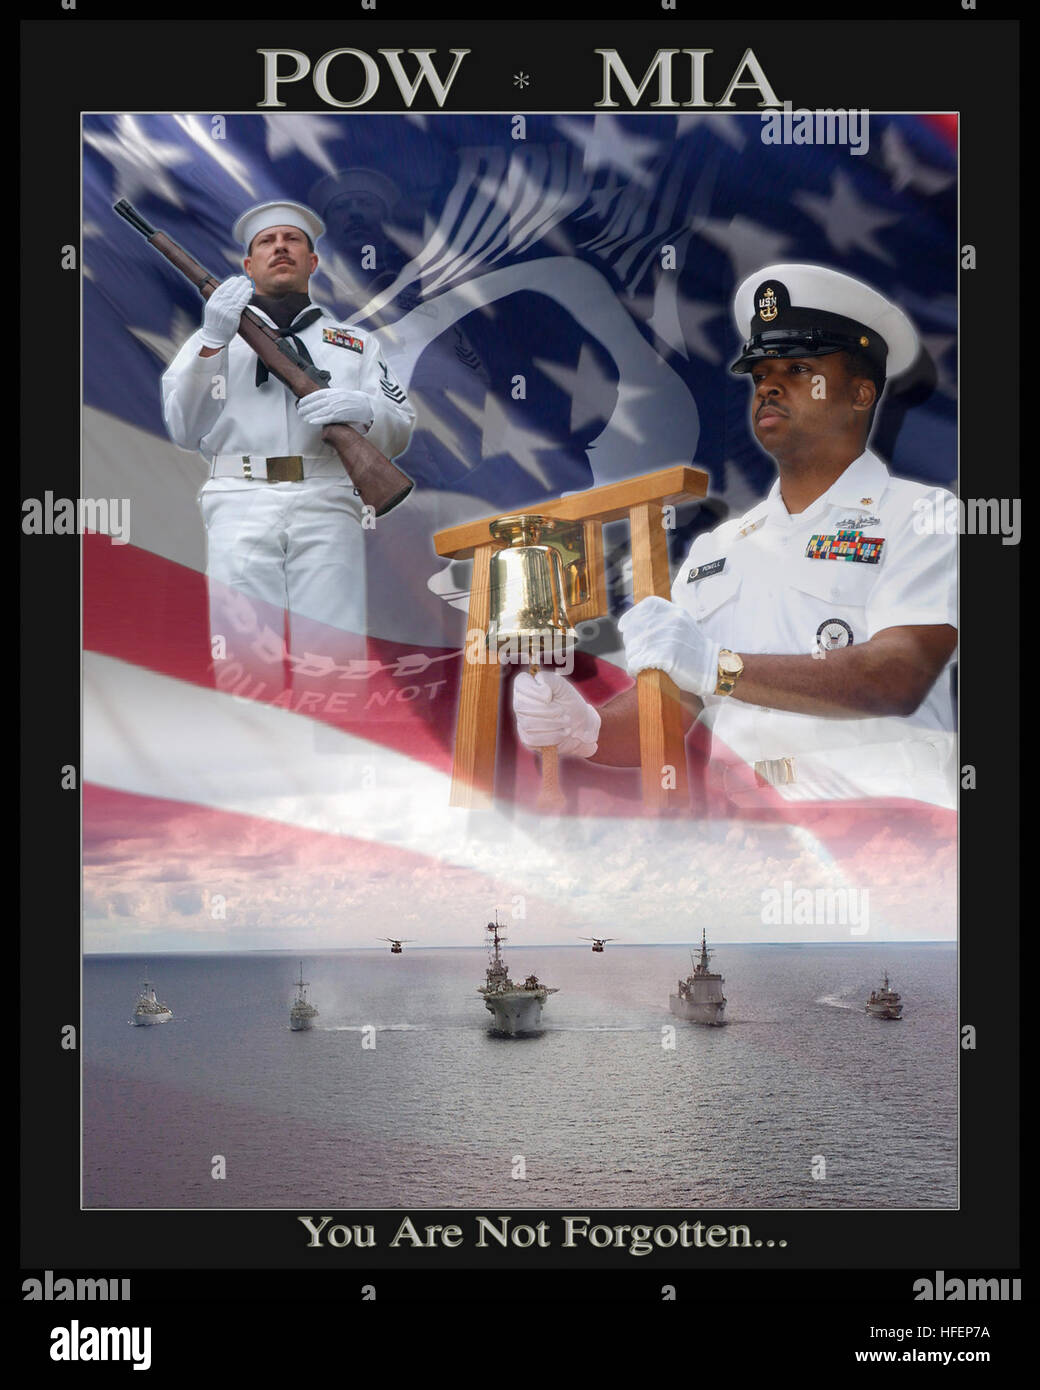 030806-N-2420K-001 U.S. Fleet Activities Sasebo Japan (Aug 6, 2003) -- A graphic composition depicting U.S. Sailors honoring fallen comrades during a Memorial Day ceremony at Soto Dam, Japan.  U.S. Navy Photographs by:  Photographer’s Mate 2nd Class Jonathan R. Kulp and Photographer’s Mate 1st Class Charlo Whorton.  Graphic design by Photographer’s Mate 2nd Class Jonathan R. Kulp.  U.S. Navy illustration.  (RELEASED) US Navy 030806-N-2420K-001 A graphic composition depicting U.S. Sailors honoring fallen comrades during a Memorial Day ceremony at Soto Dam, Japan Stock Photo